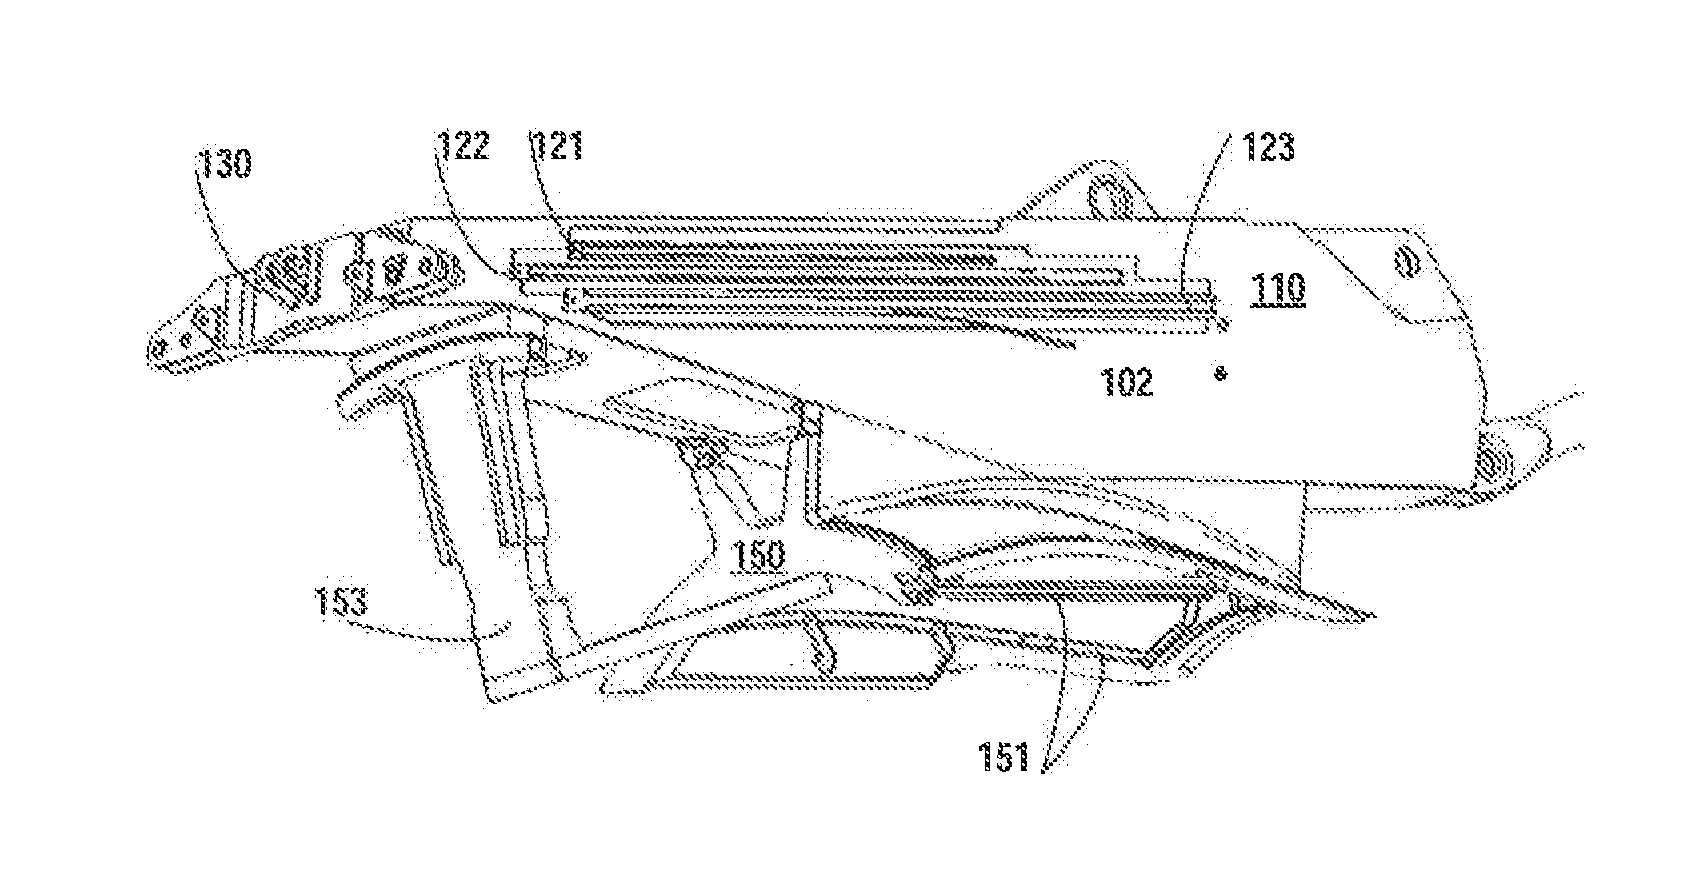 Integrated pylon structure for propulsion system